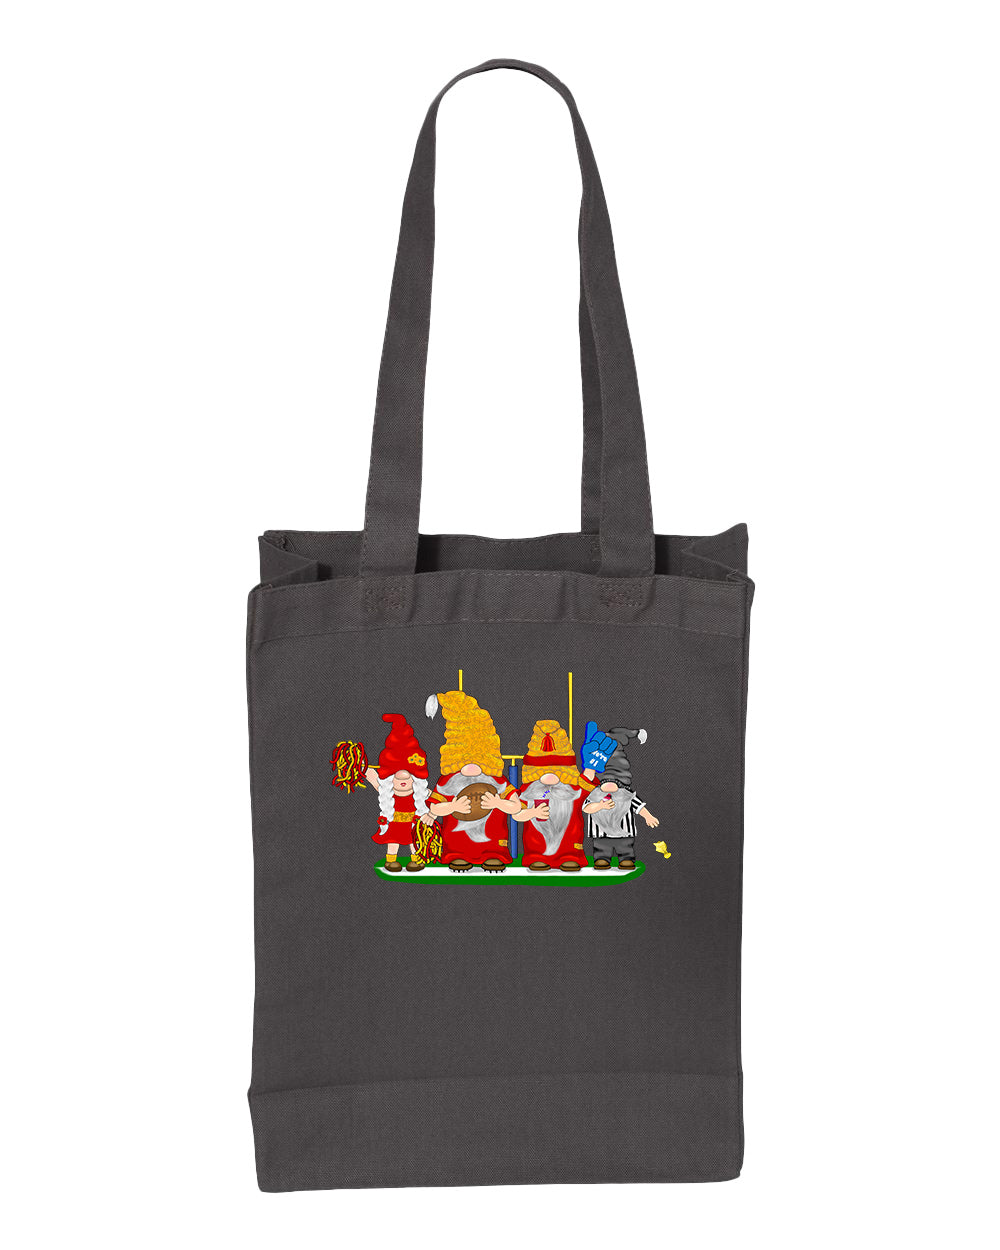 Red & Gold Football Gnomes  (similar to Kansas City) on Gusset Tote